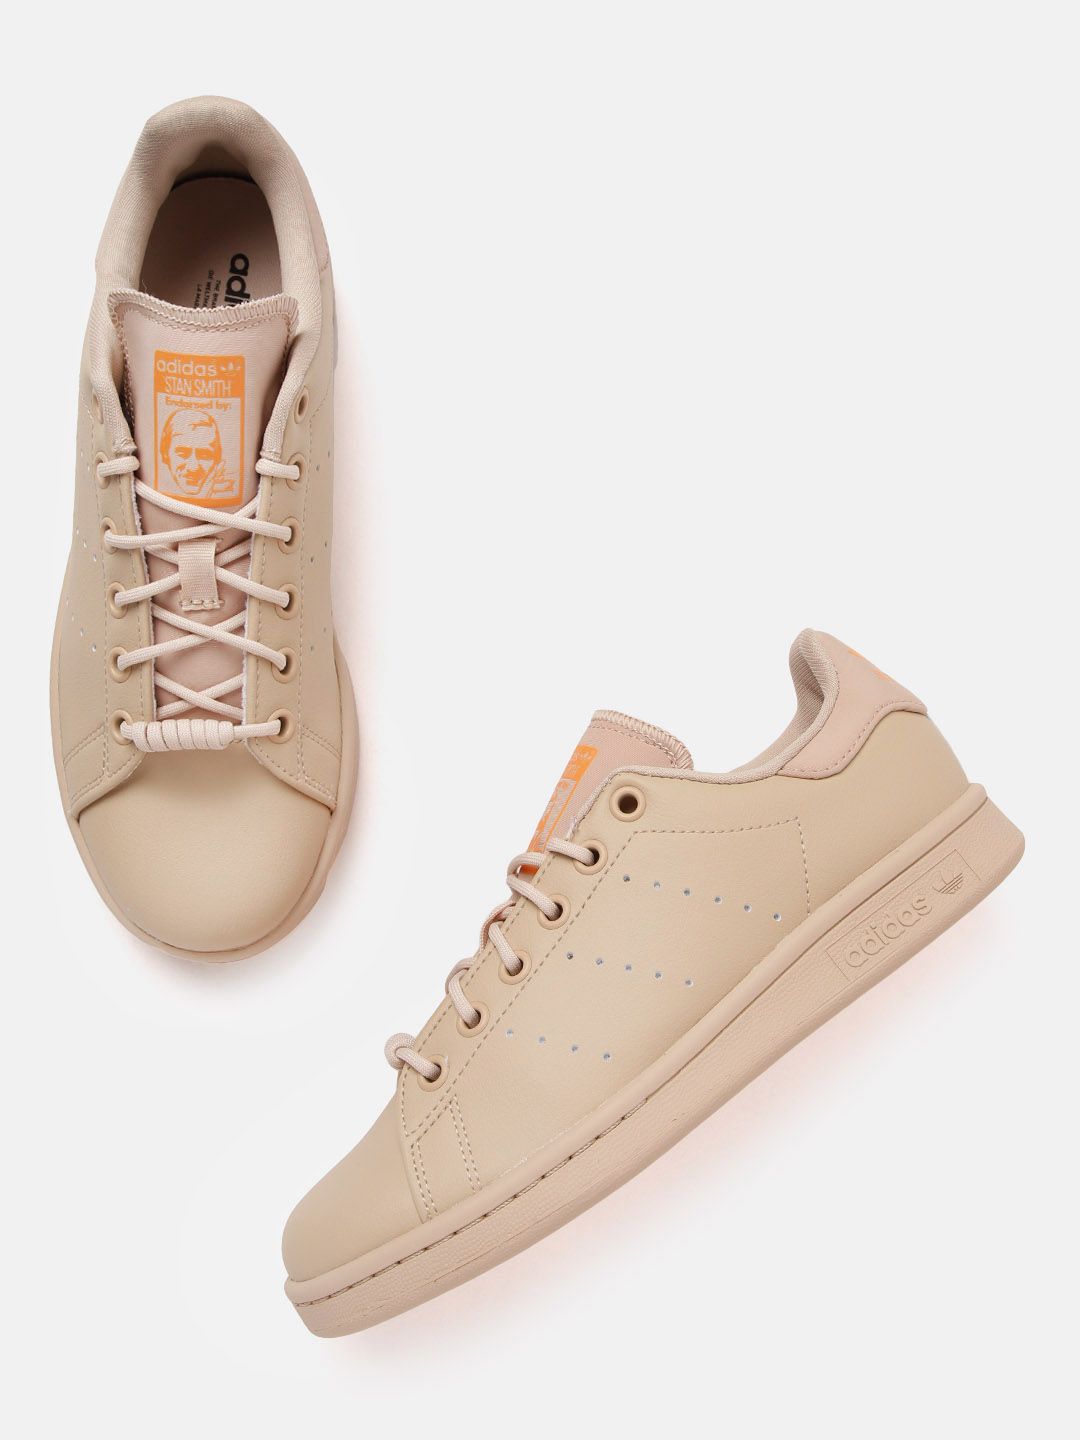 ADIDAS Originals Women Beige Solid Perforated Stan Smith Sneakers Price in India